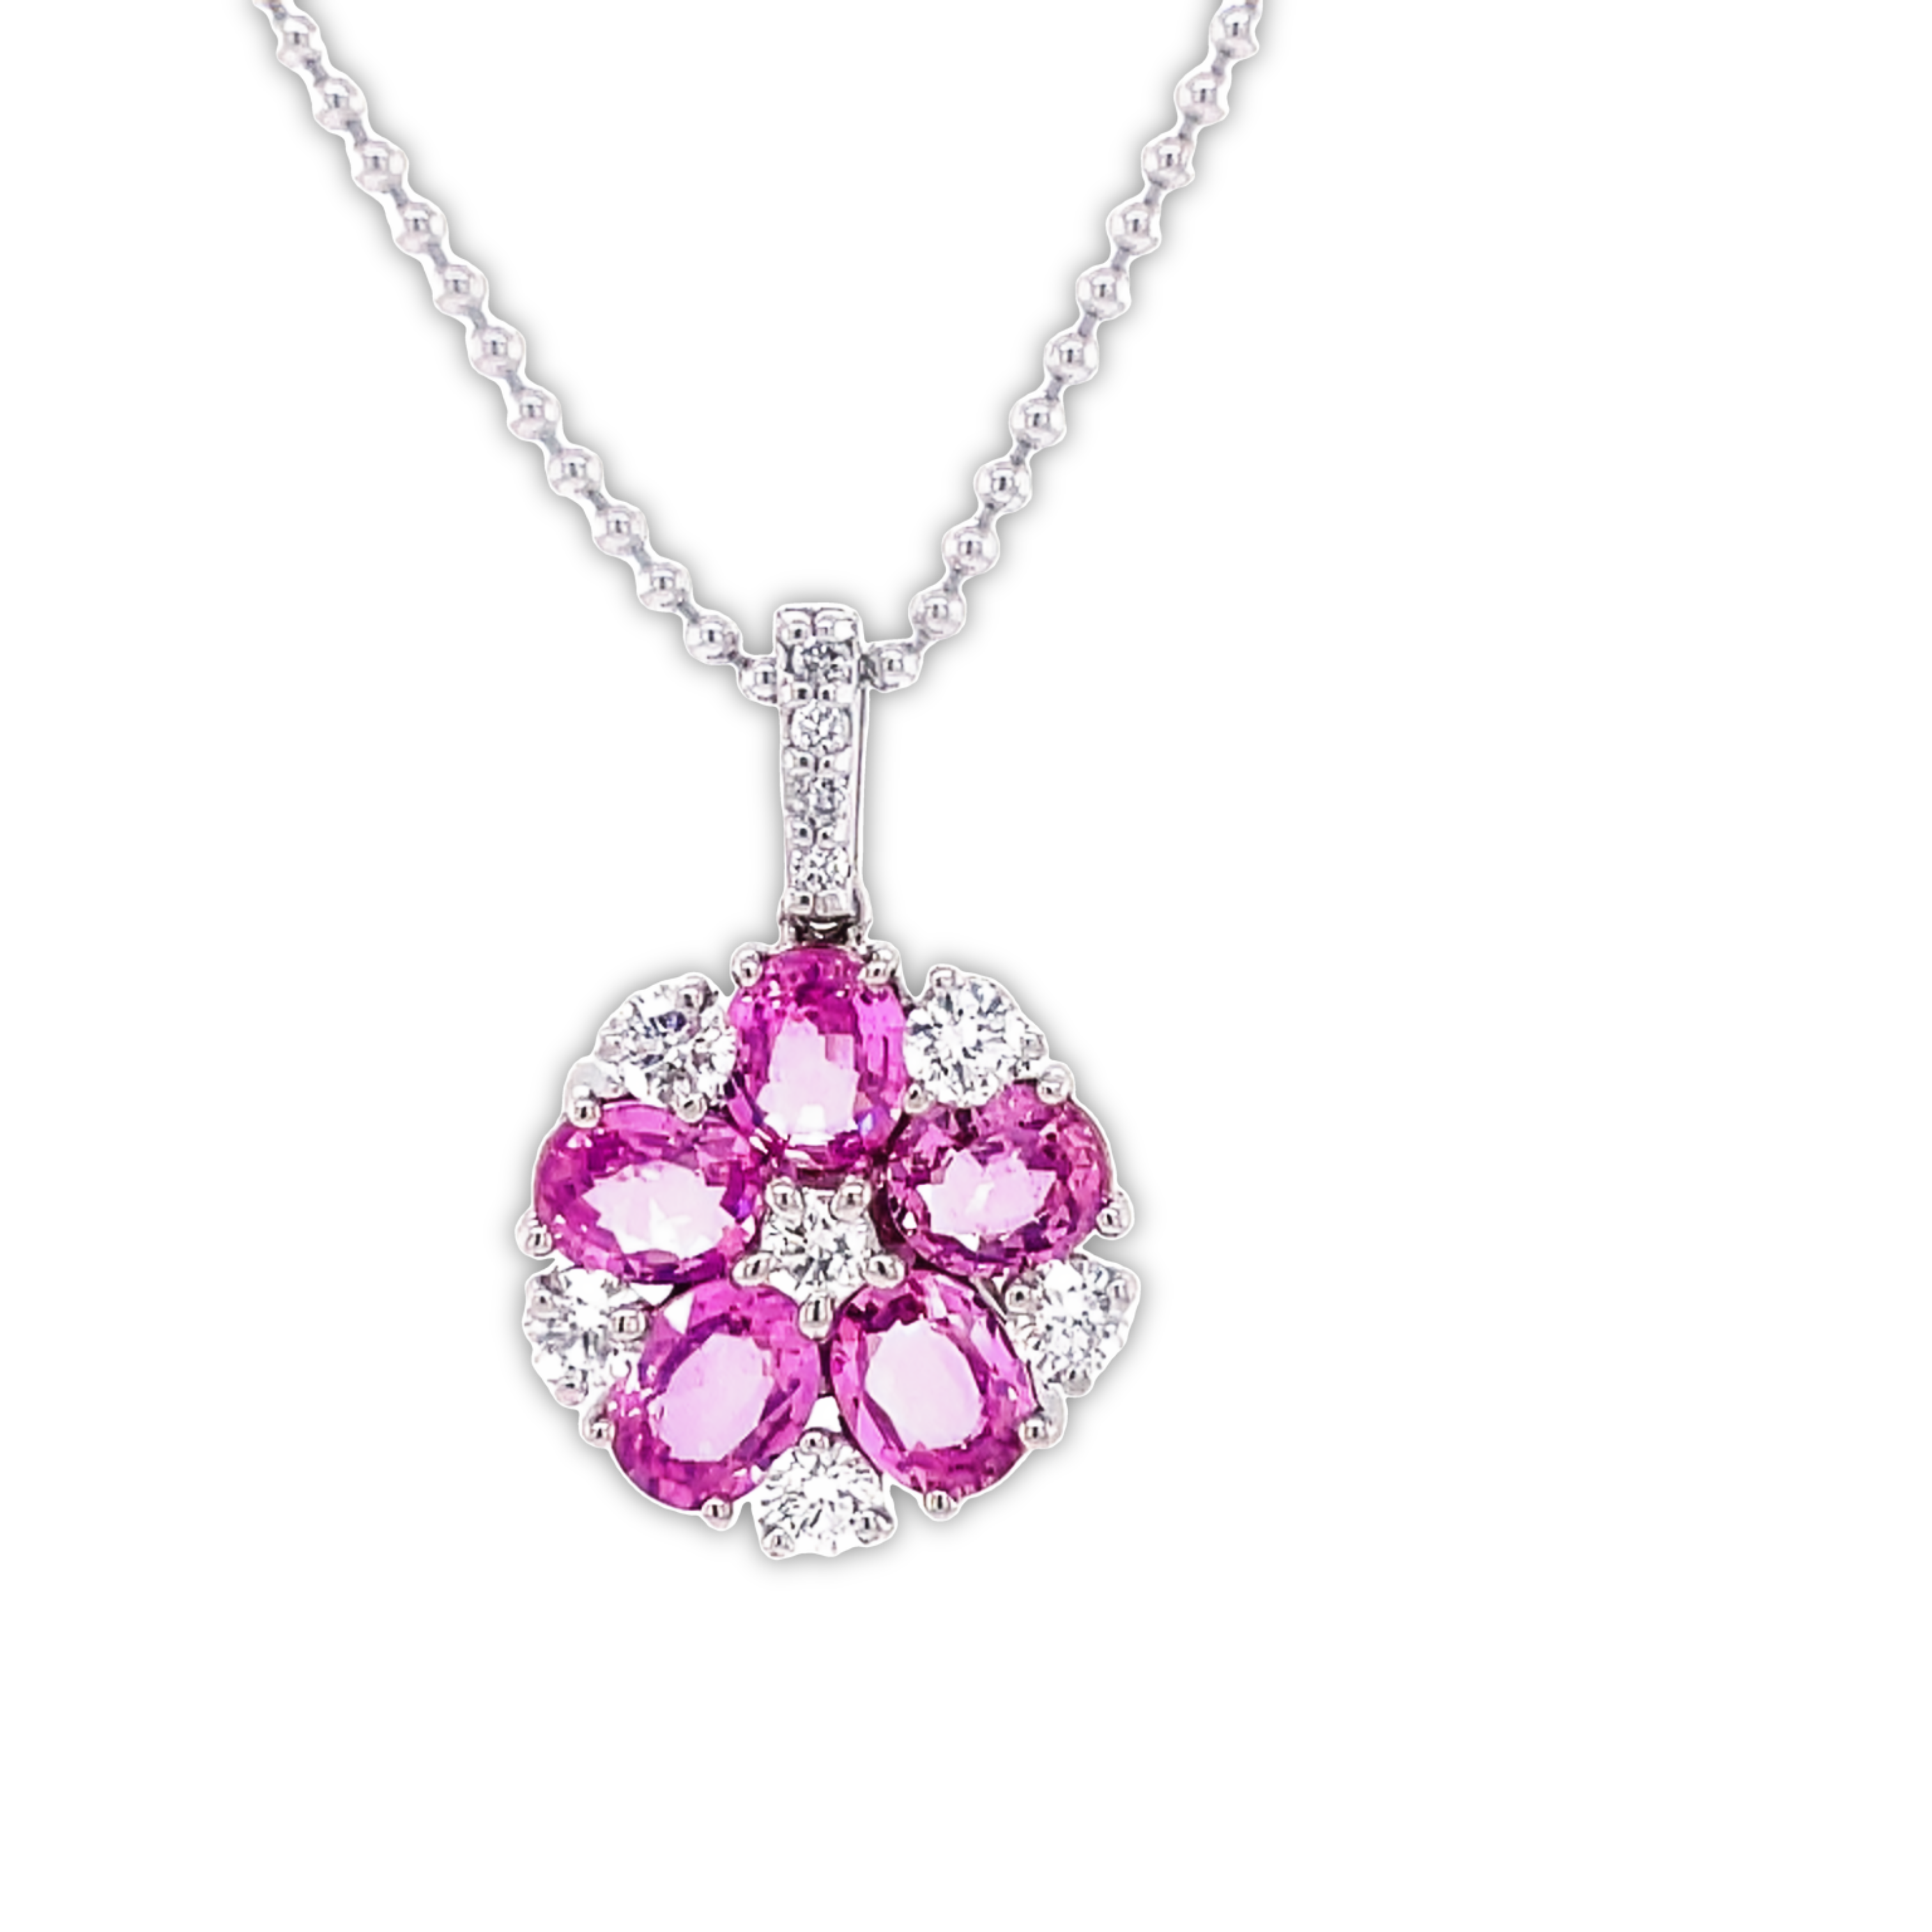 18kt white gold  Flower style 20.00 mm (including bail)  Round diamonds 0.48 cts   Pink sapphires 2.51 cts  16" long chain 1.3 mm thickness   Secure lobster catch